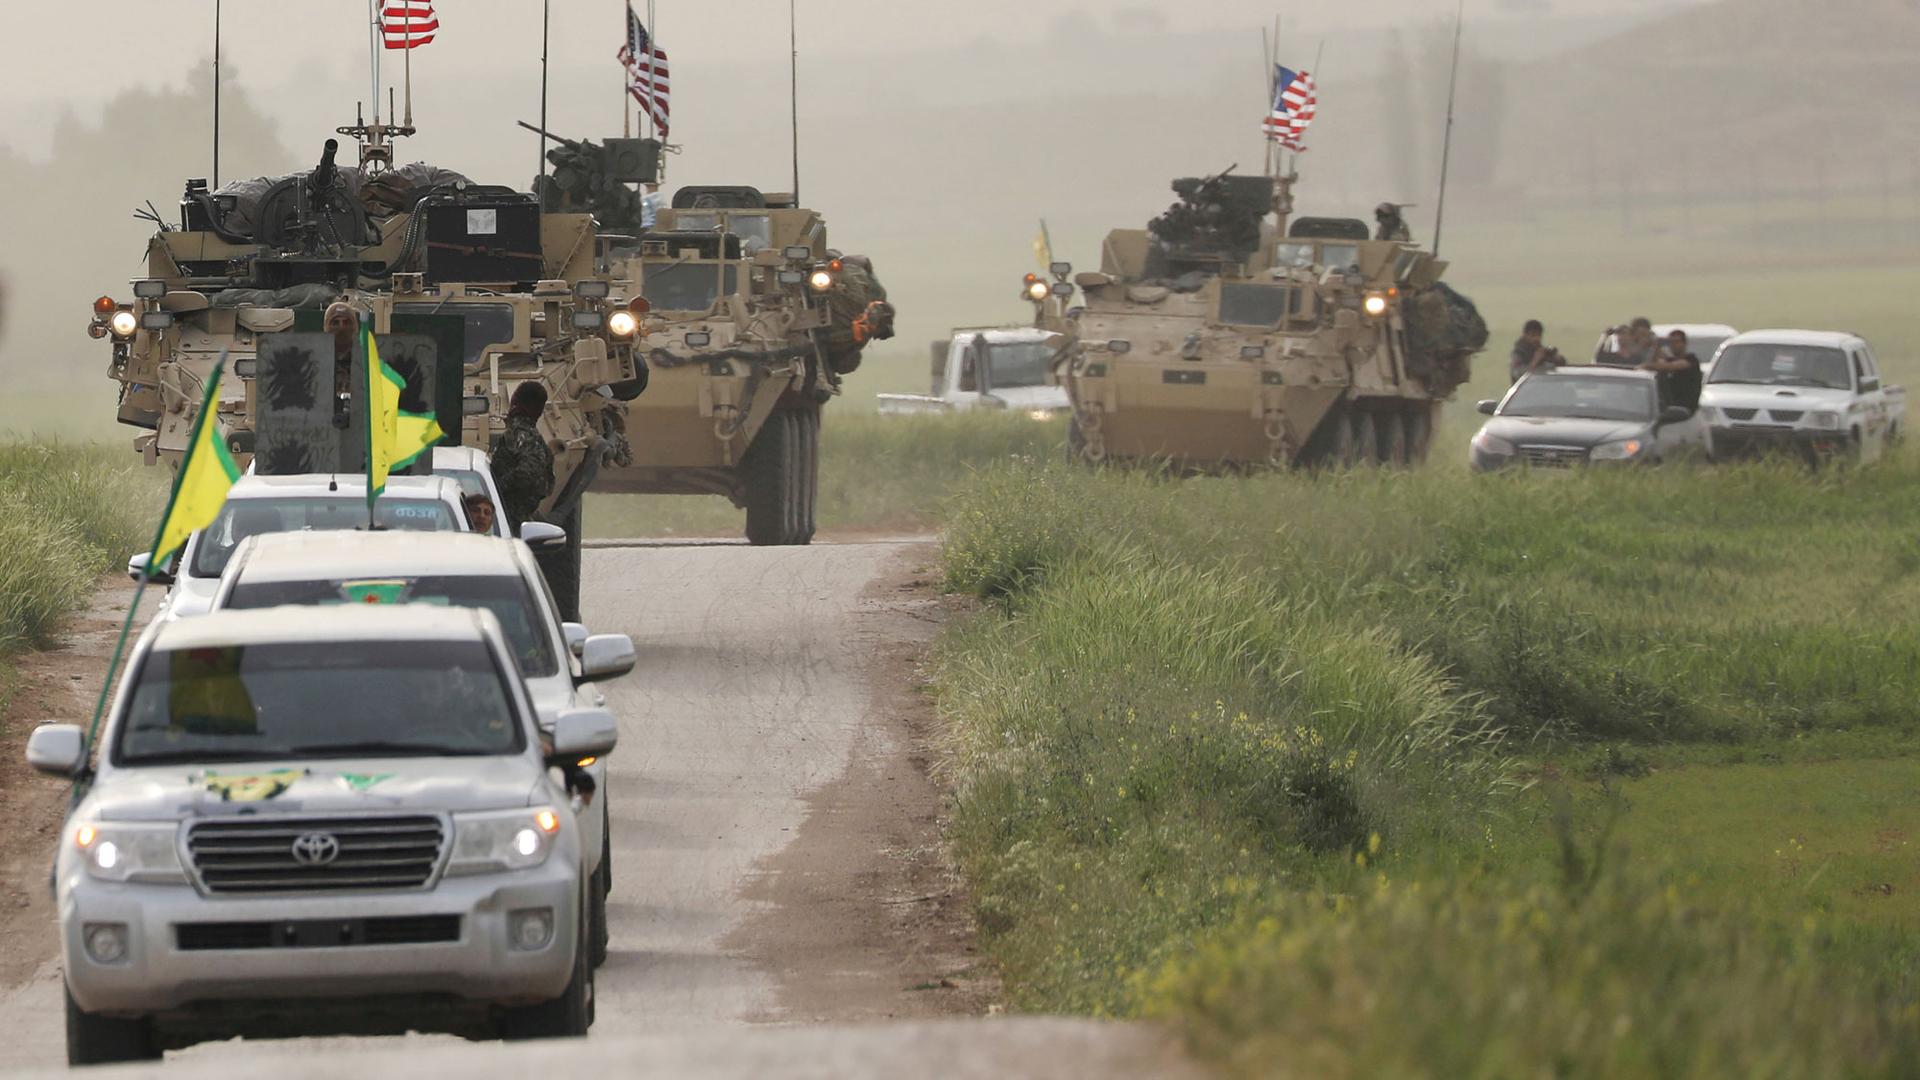 Kurdish fighters driving Toyota SUVs with green and yellow flags on top are shown driving in head of US military MRAP vehicles.